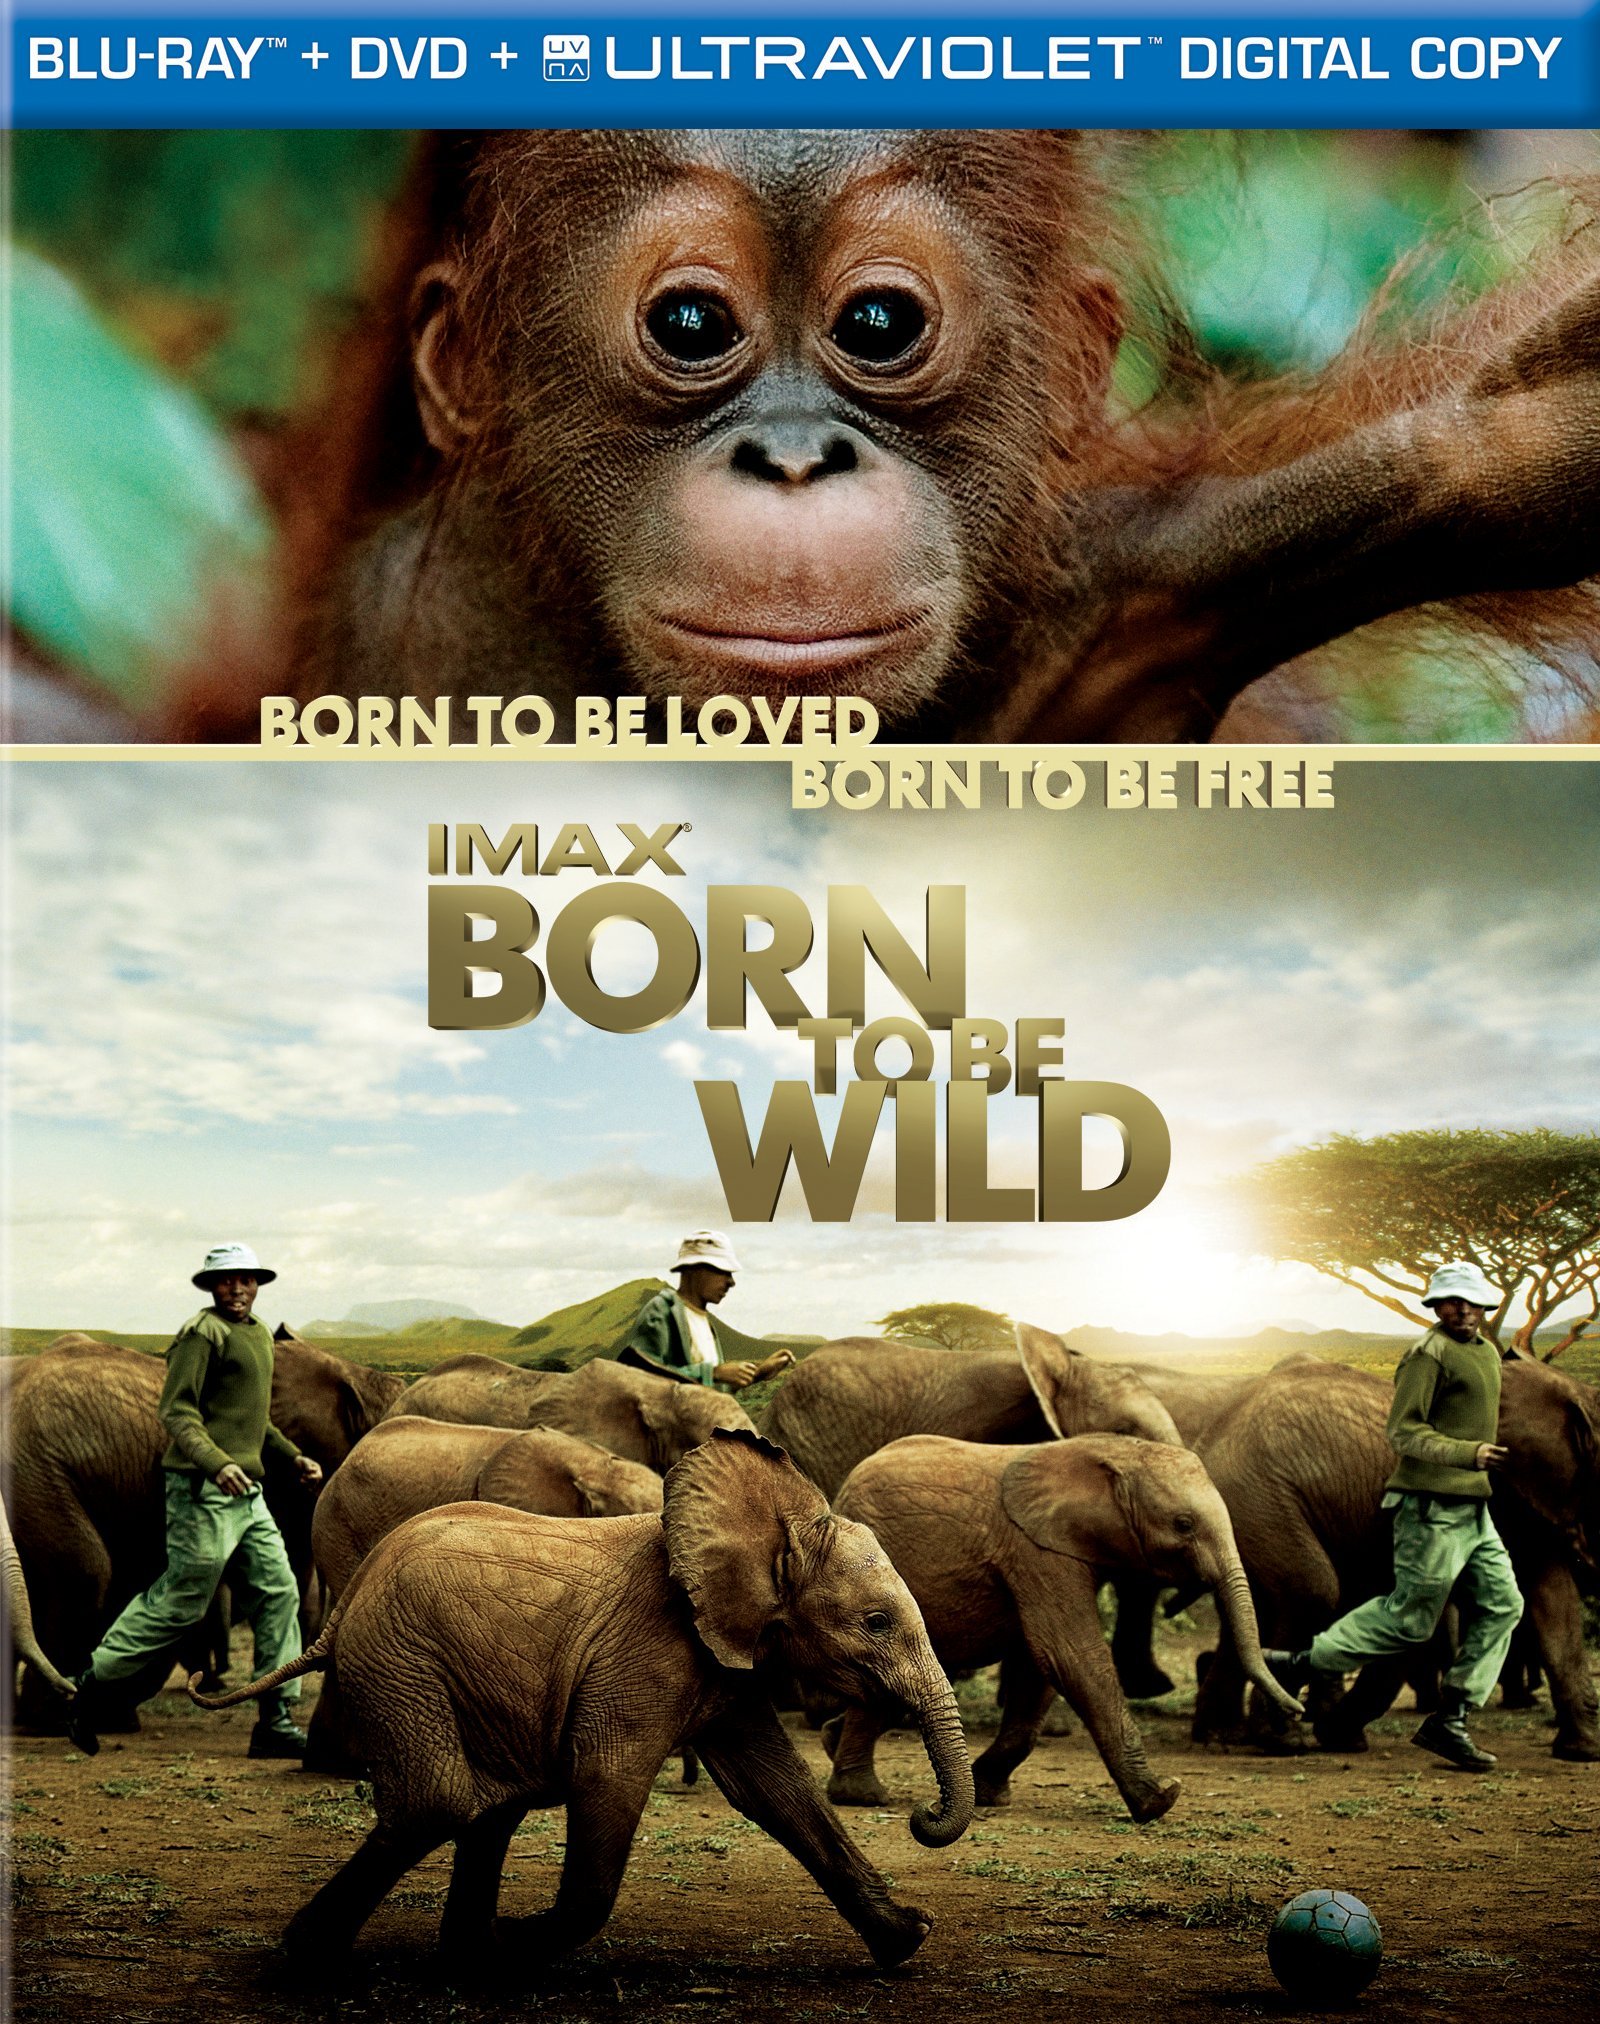 IMAX: Born to be Wild Available on Blu-ray/DVD April 17th